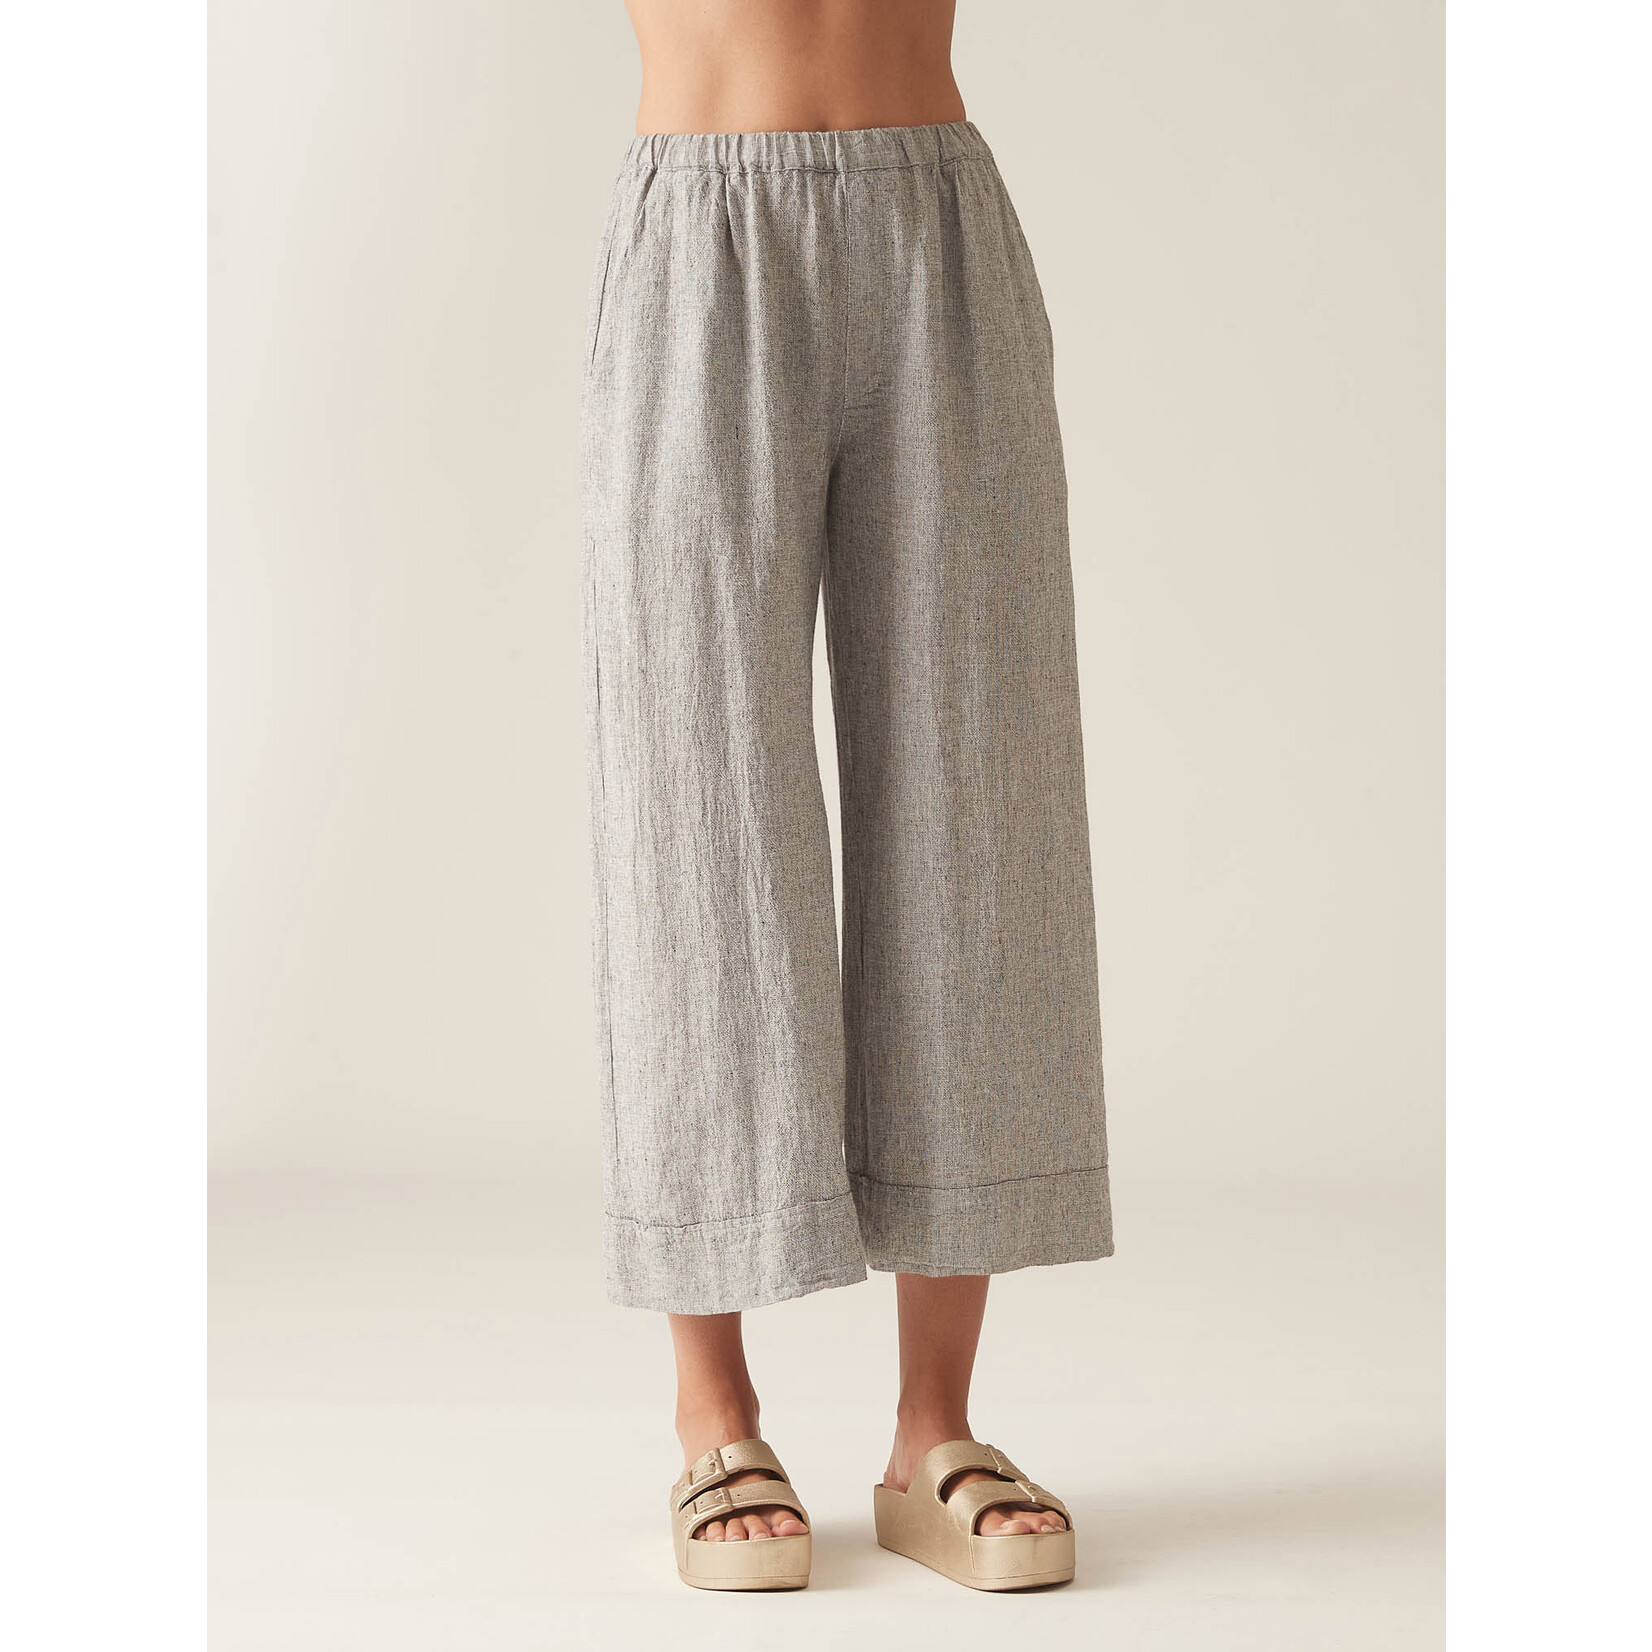 Wide Leg Crop Pant in Gray and White Check